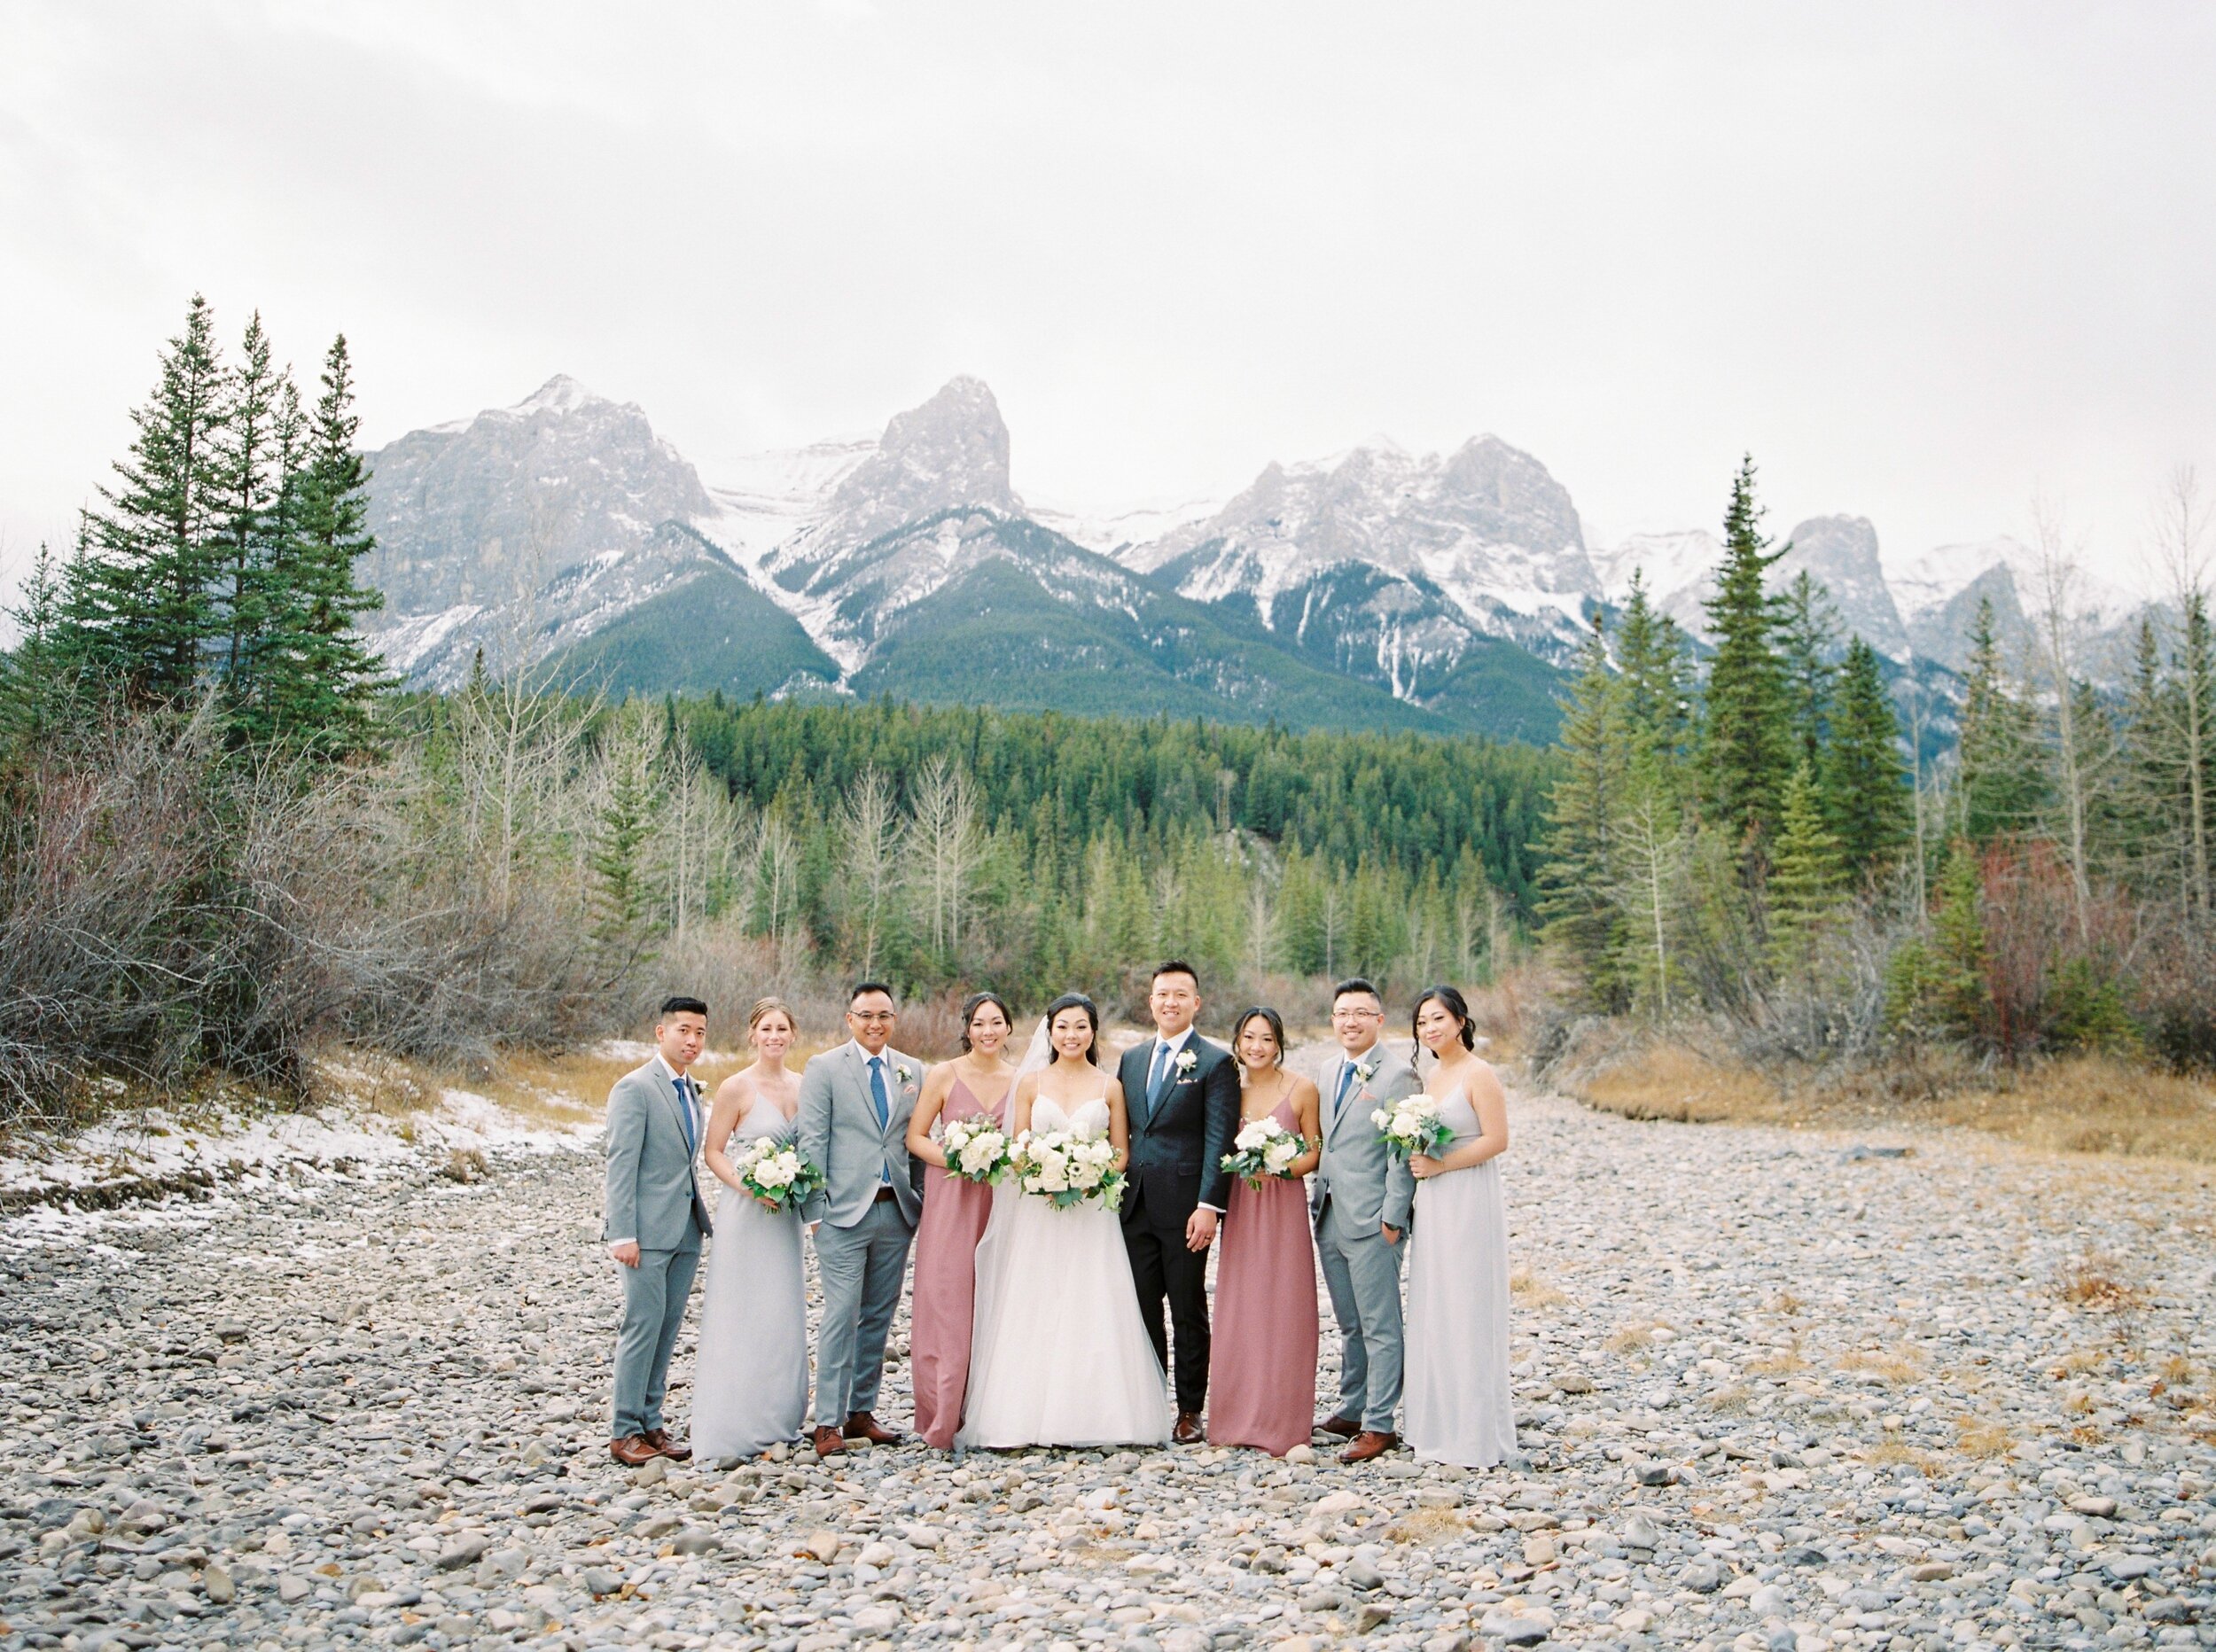  Canmore The Malcom Hotel Wedding | Winter Wedding with dogs blush bridesmaids dresses 